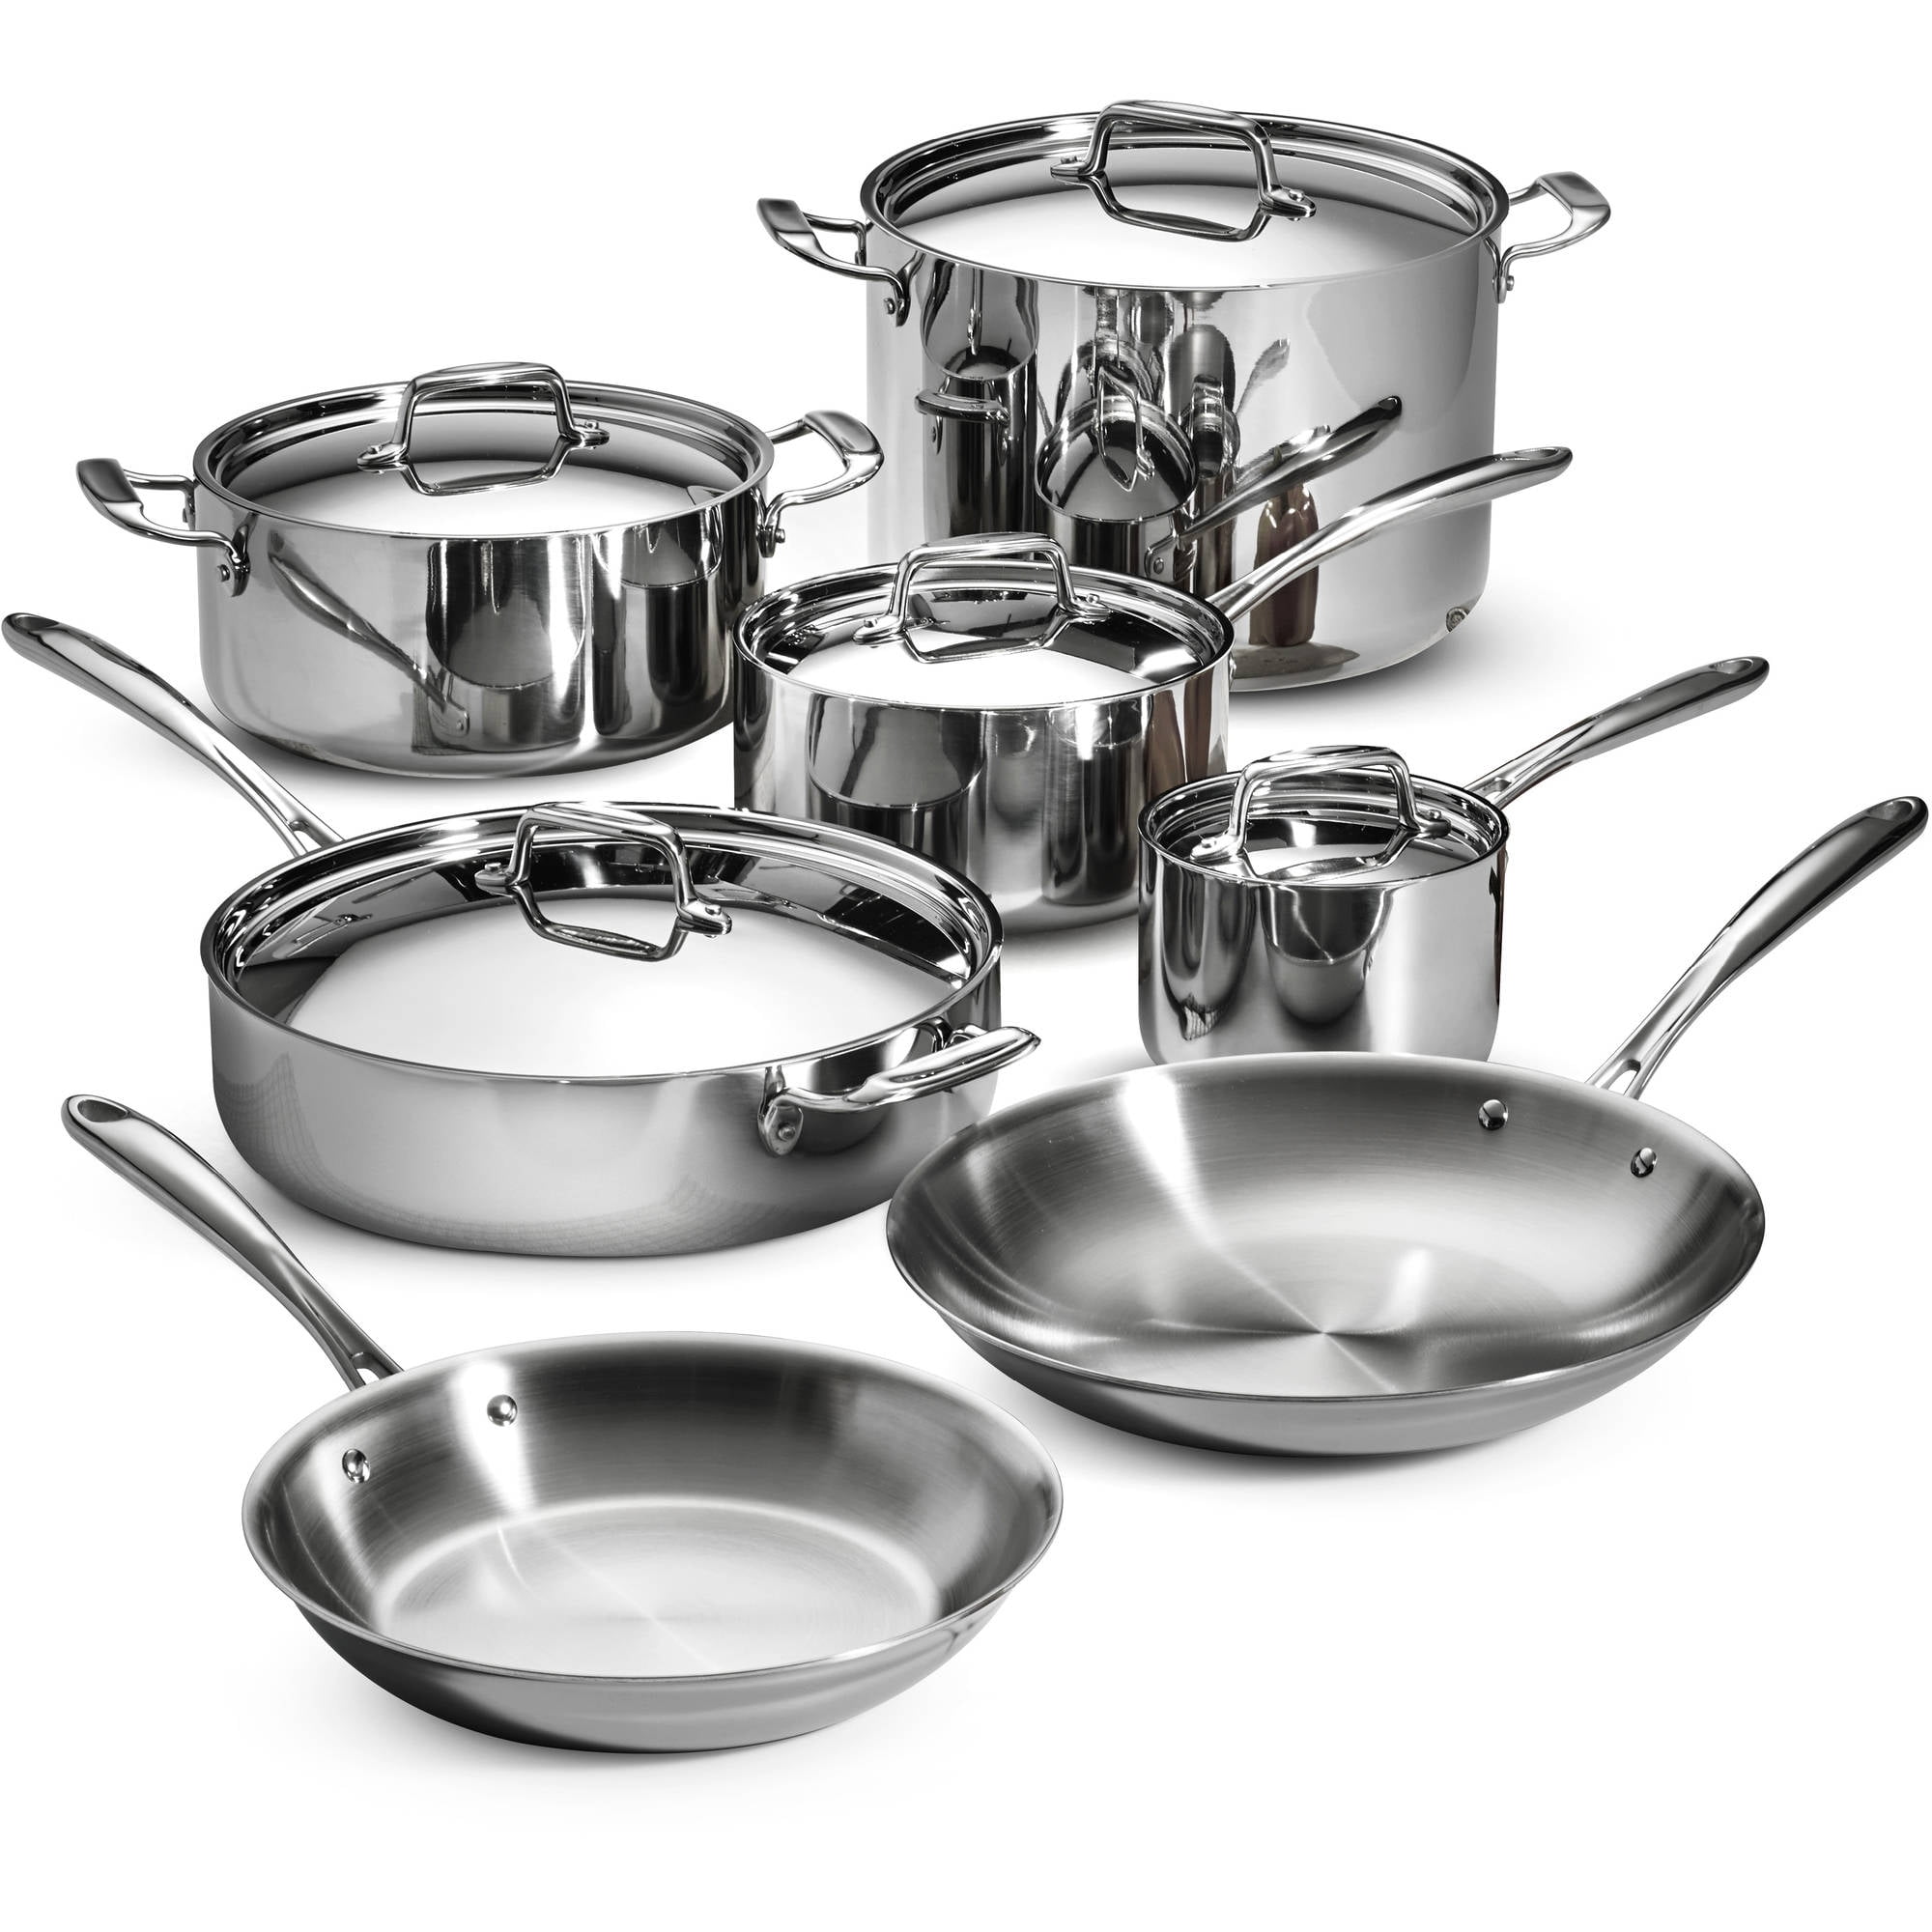 Tramontina 12-Piece Stainless Steel Tri-Ply Clad Cookware Set - Walmart.com Stainless Steel Tri Ply Cookware